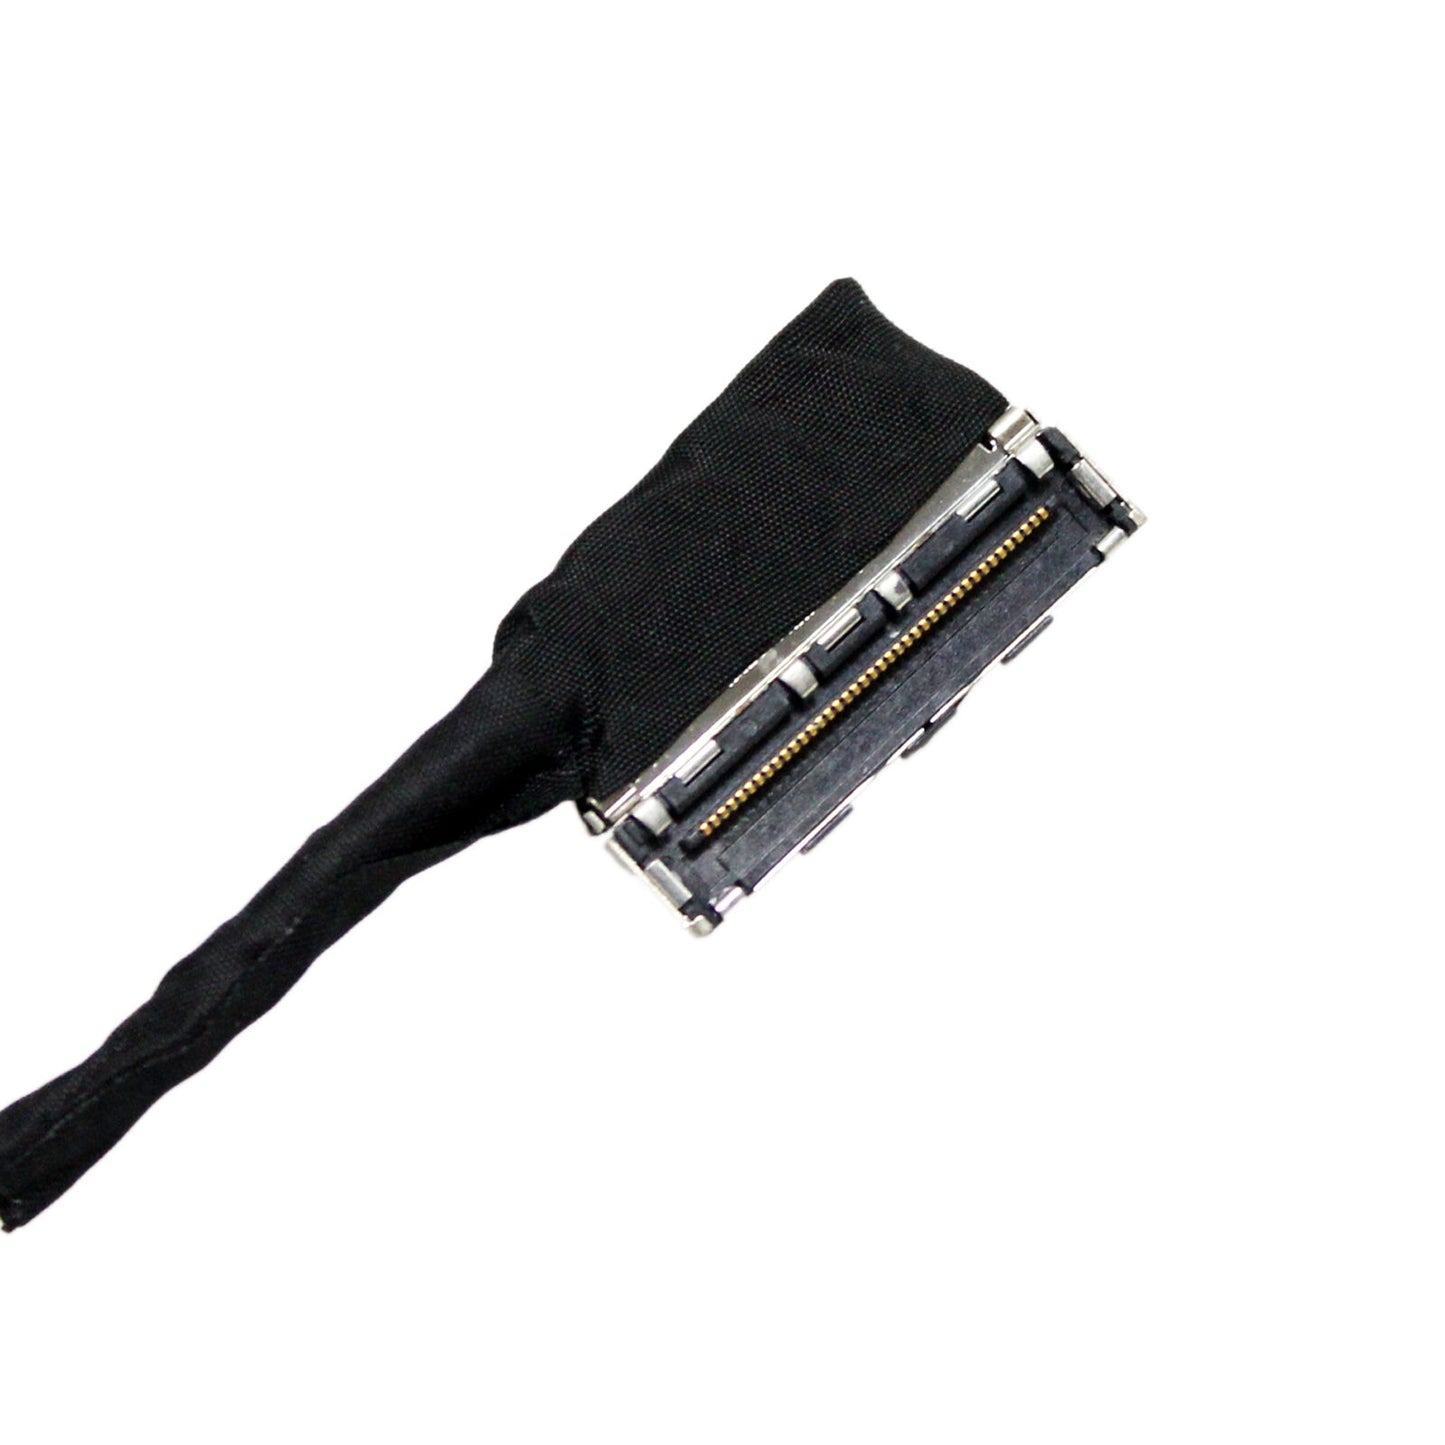 Sony New LCD LED Display Video Screen Cable M870 VAIO VPC-CW 073-0101-7329_A